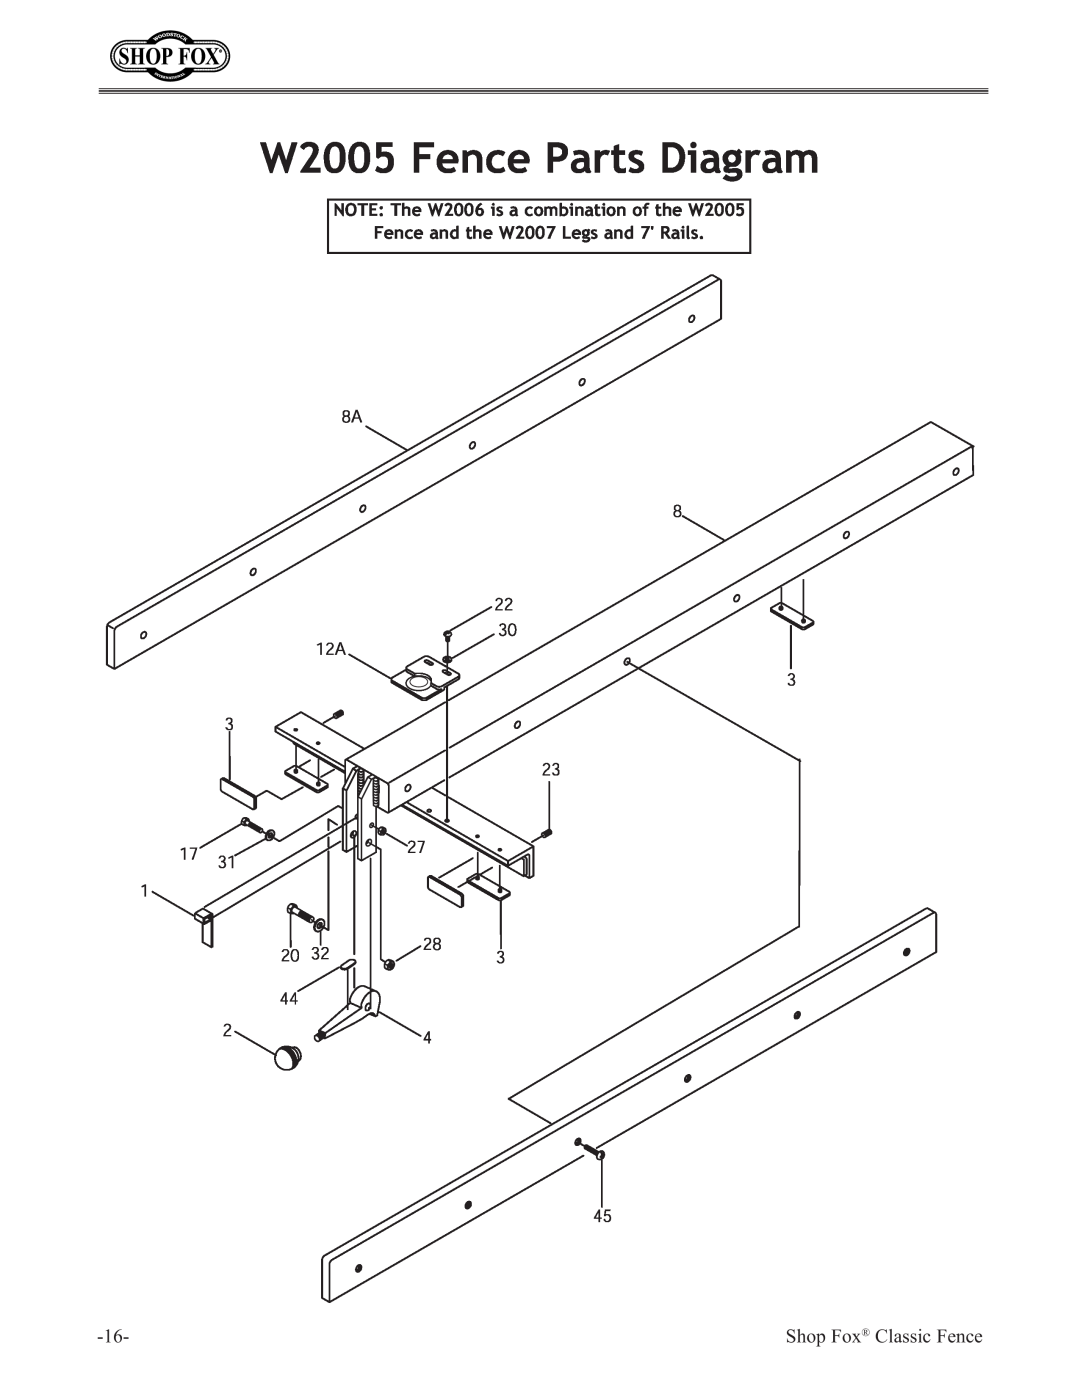 Woodstock W2005 Fence Parts Diagram, Shop Fox Classic Fence, NOTE The W2006 is a combination of the W2005 